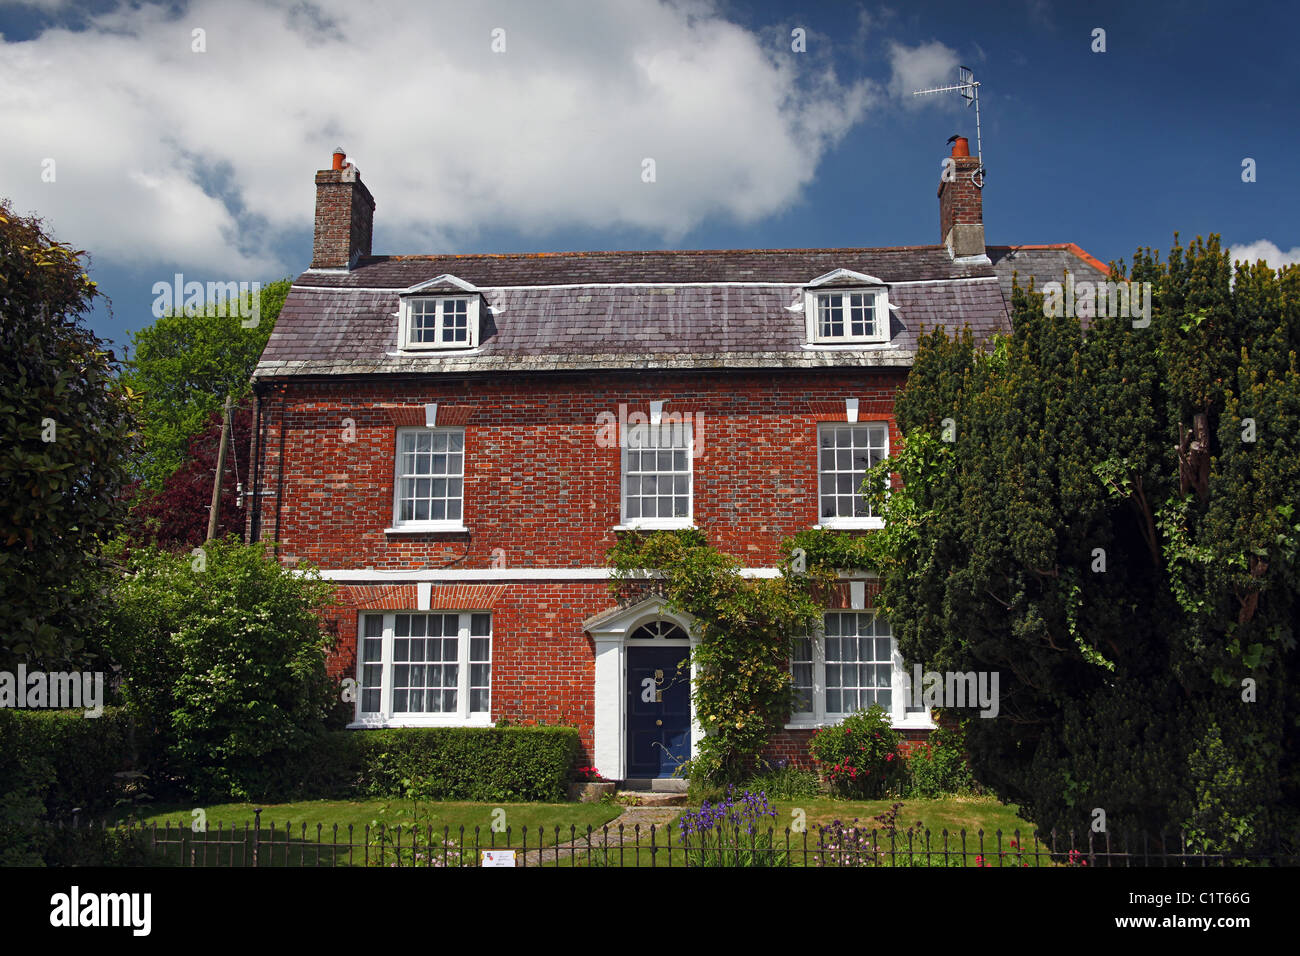 Elegant red brick house in the village of Cerne Abbas, Dorset, England, UK 'England's most desirable village 2008' Stock Photo